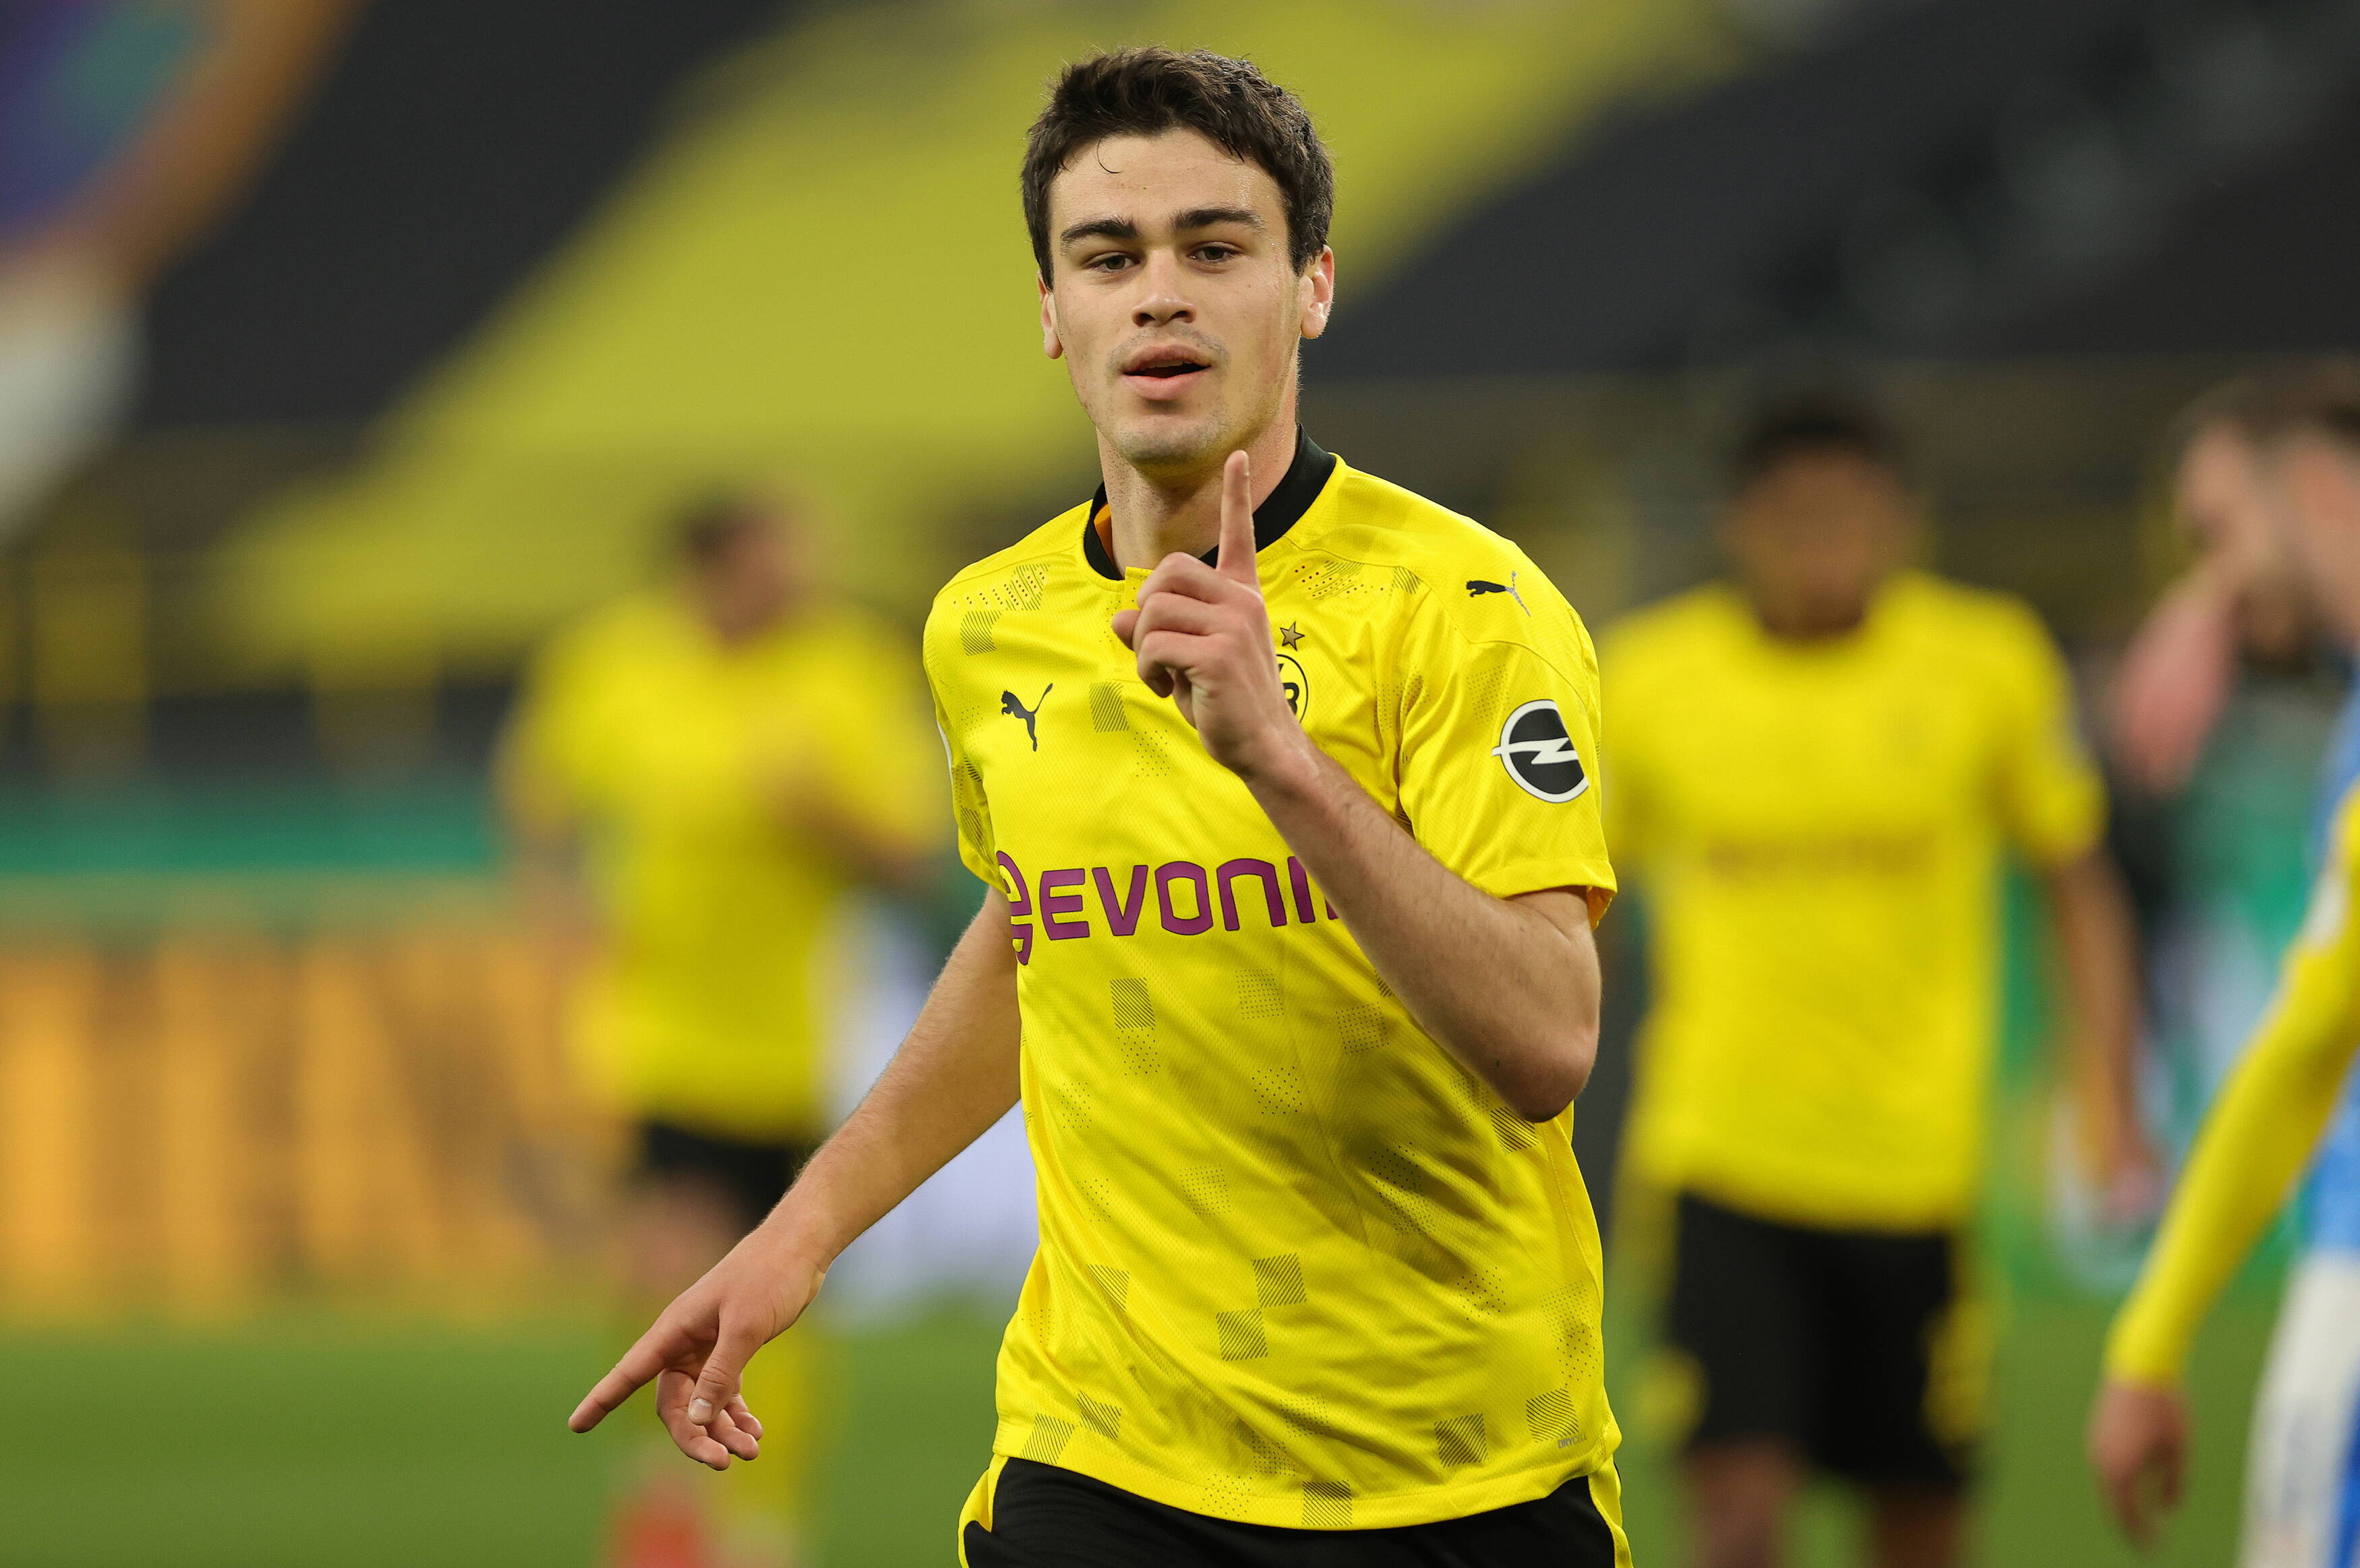 Chelsea’s Christian Pulisic comments on the potential of Borussia Dortmund’s Giovanni Reyna